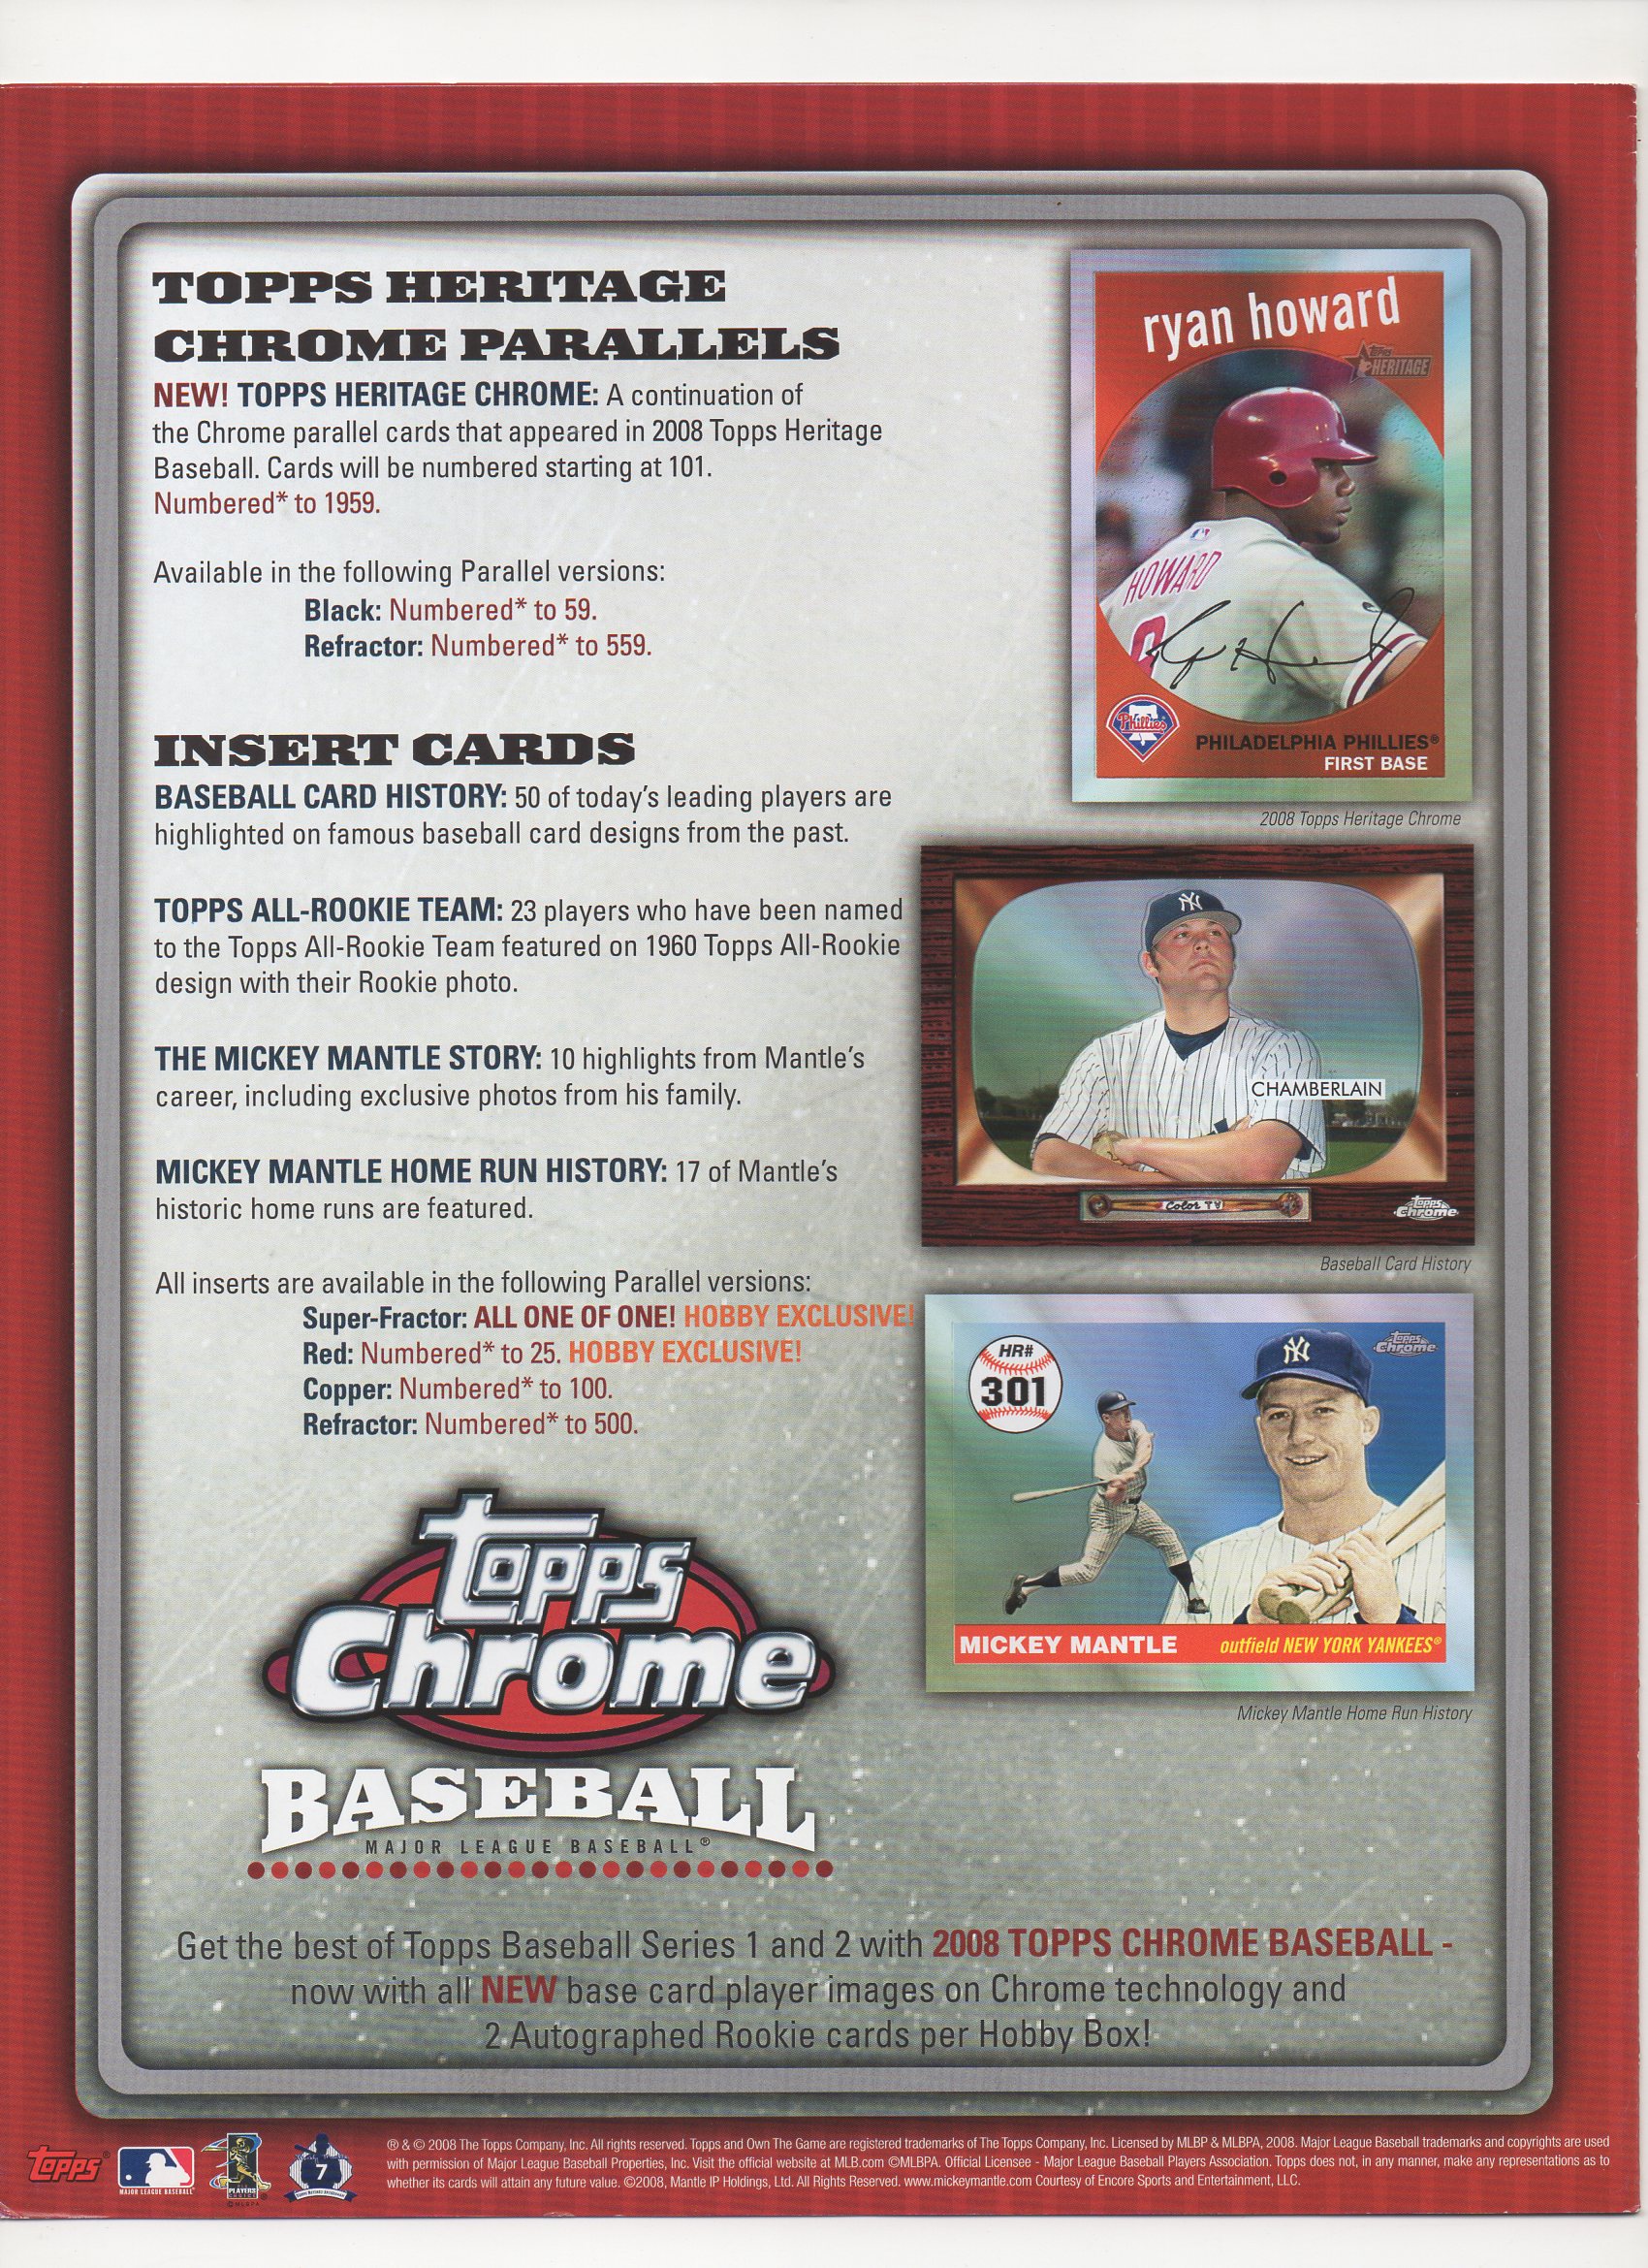 2008 topps heavy stock 4 page foldout